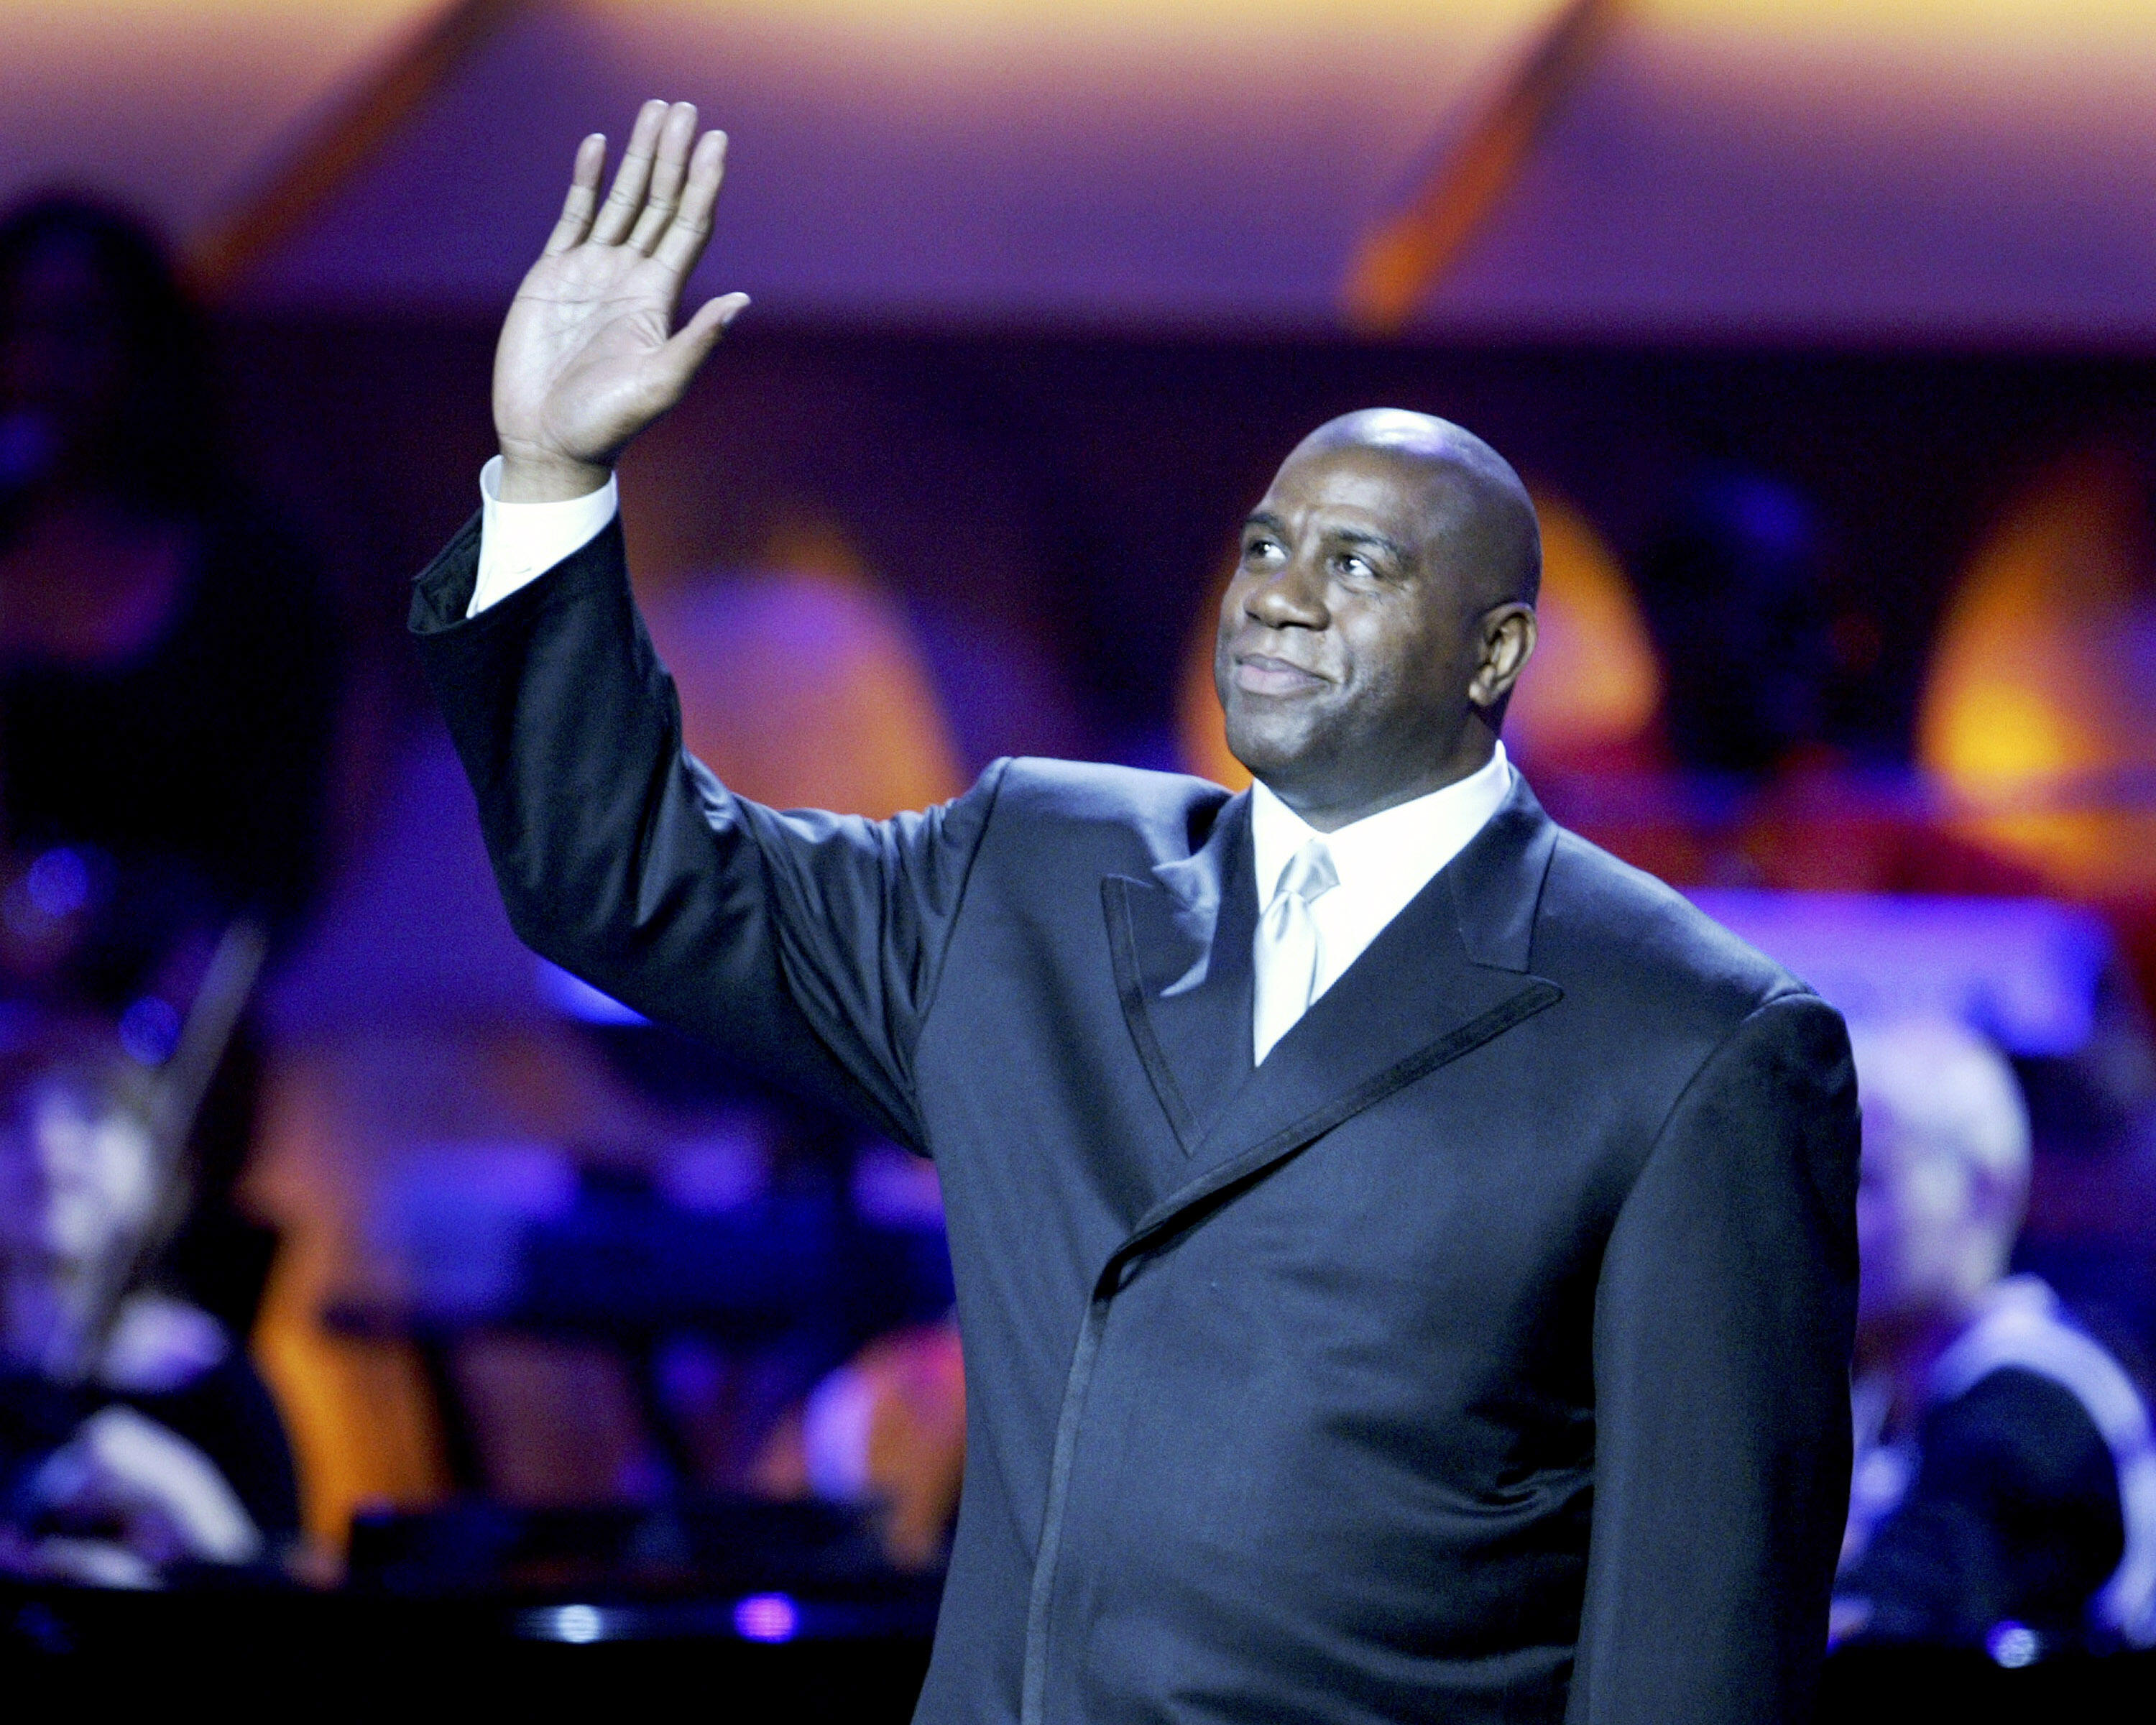 LOS ANGELES - FEBRUARY 12:  (US TABS OUT; HOLLYWOOD REPORTER OUT) Former Los Angeles Lakers star Magic Johnson waves to the audience during the 